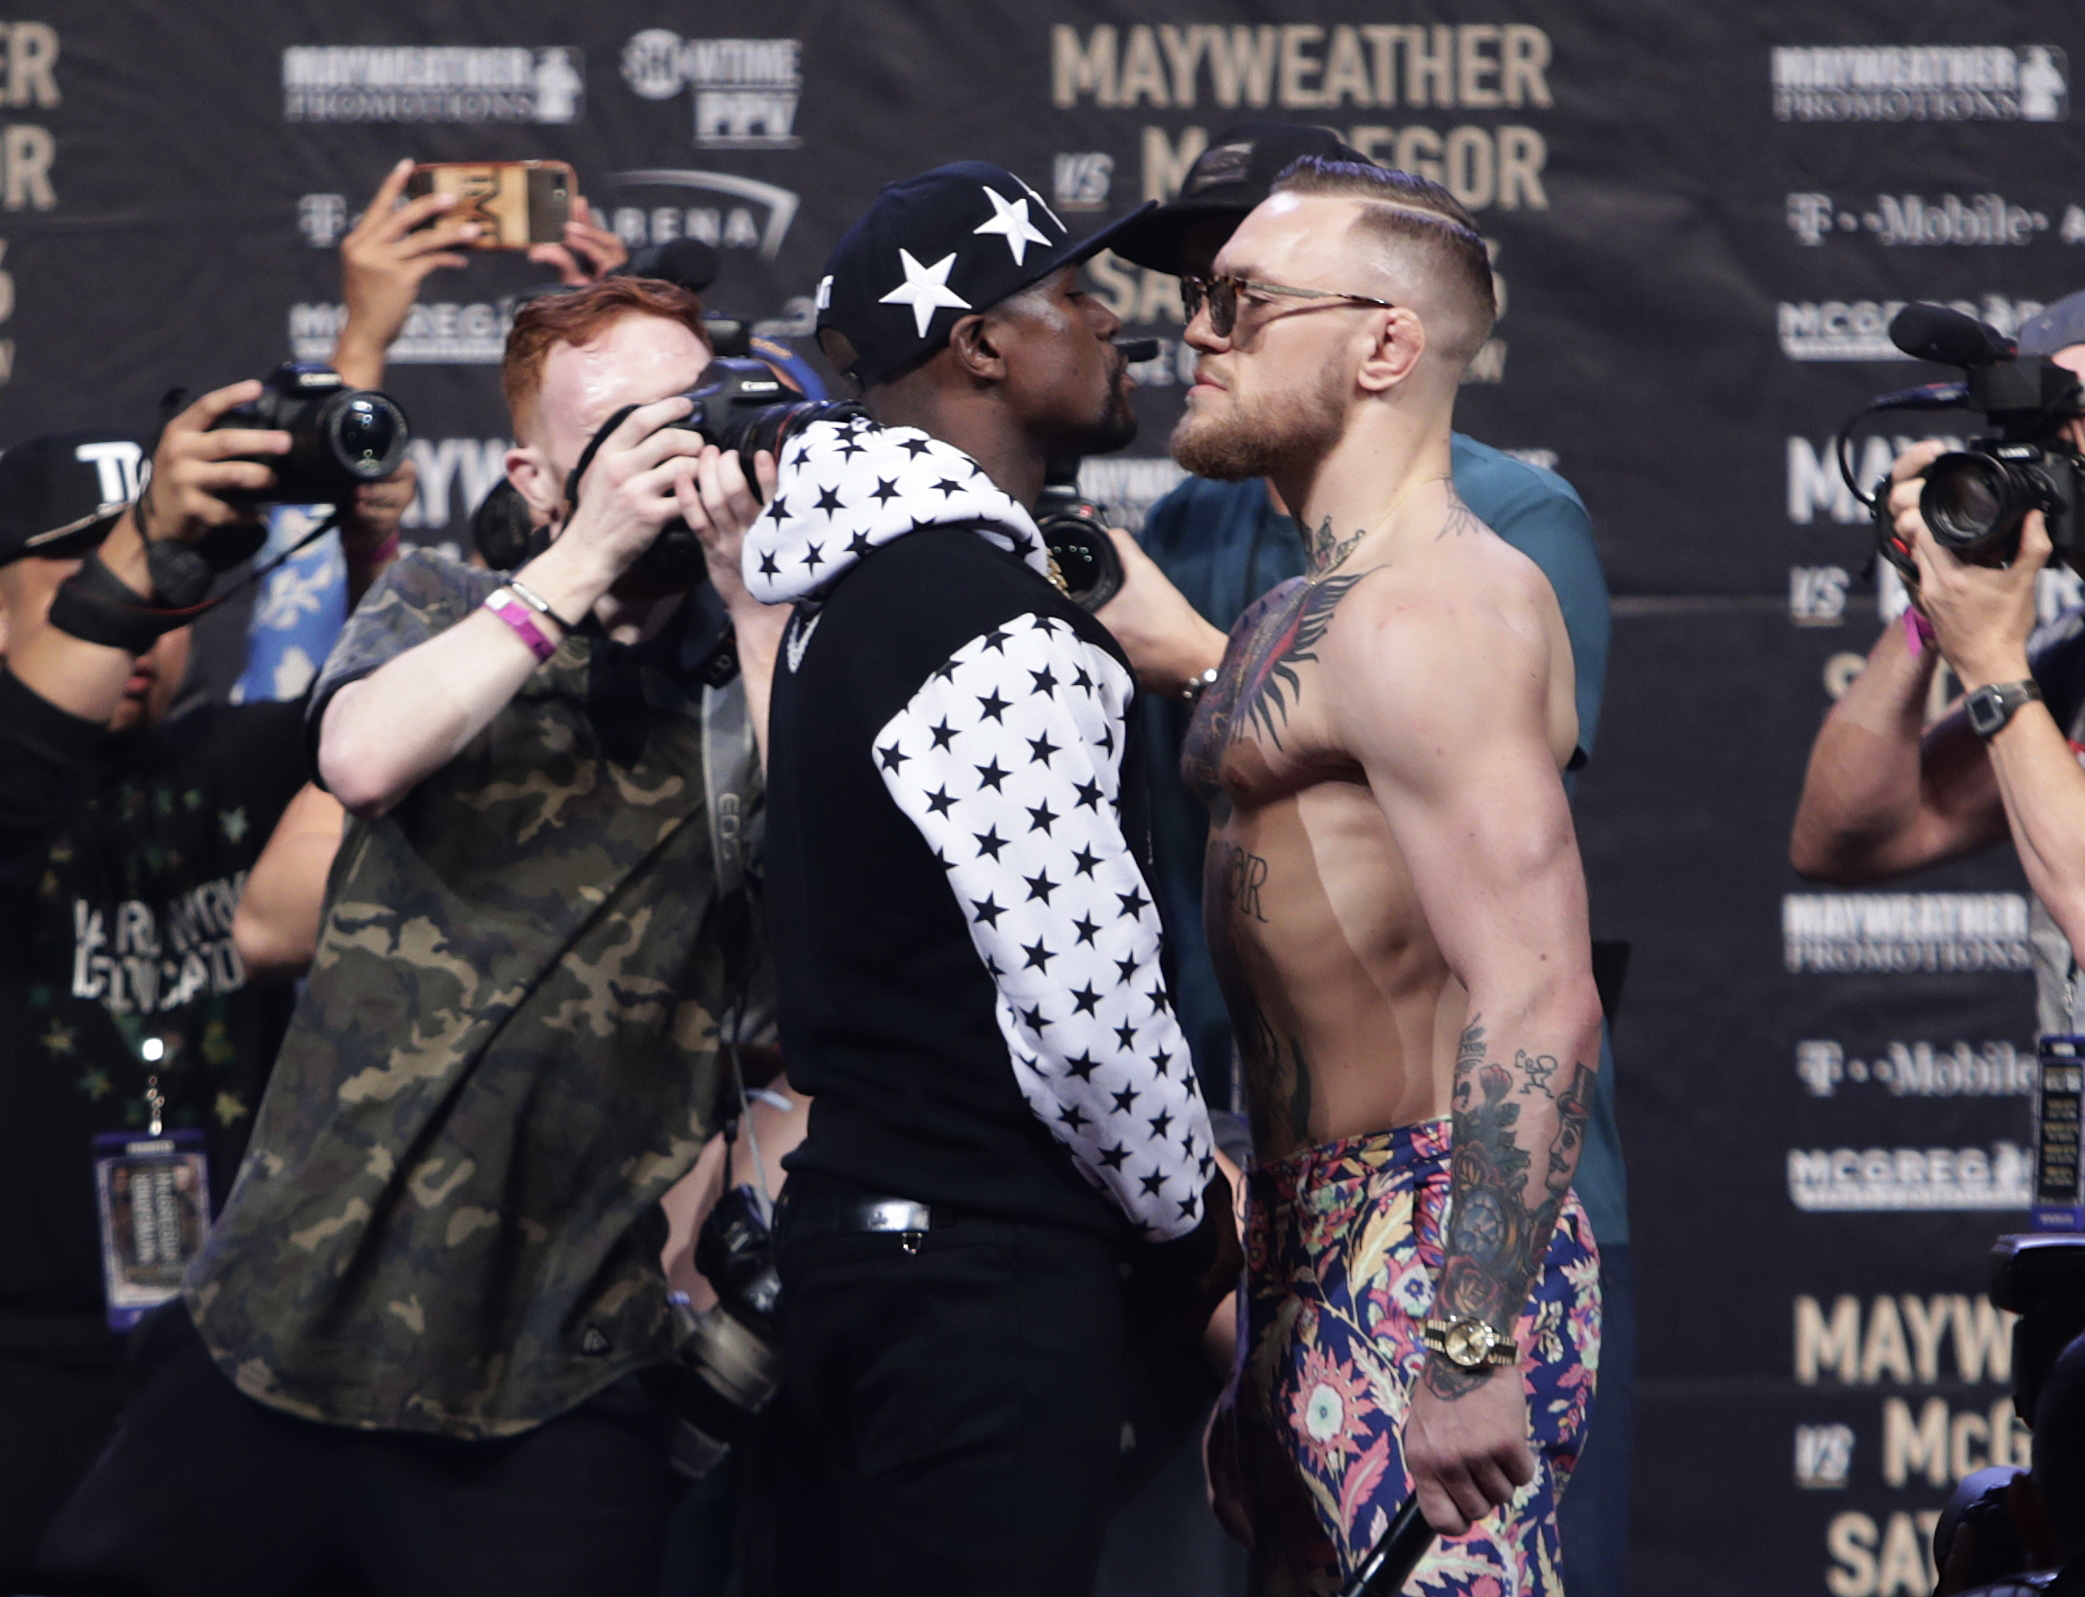 Floyd Mayweather Jr., left, and Conor McGregor exchange words during a news conference at Barclays Center on Thursday, July 13, 2017, in New York. (AP Photo/Frank Franklin II)